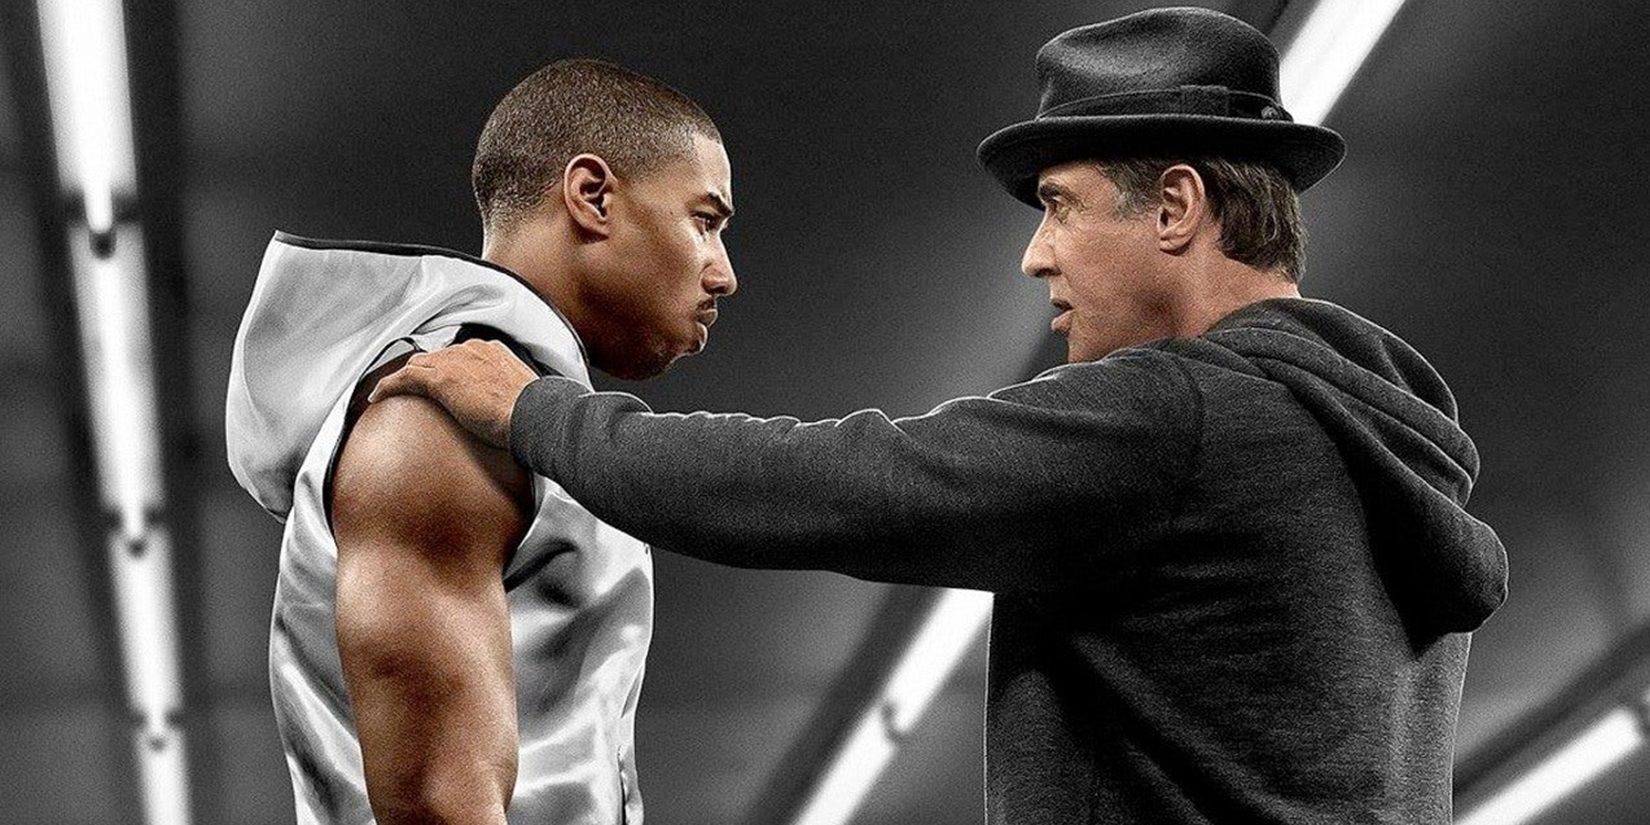 How To Watch The Rocky & Creed Movies In Order